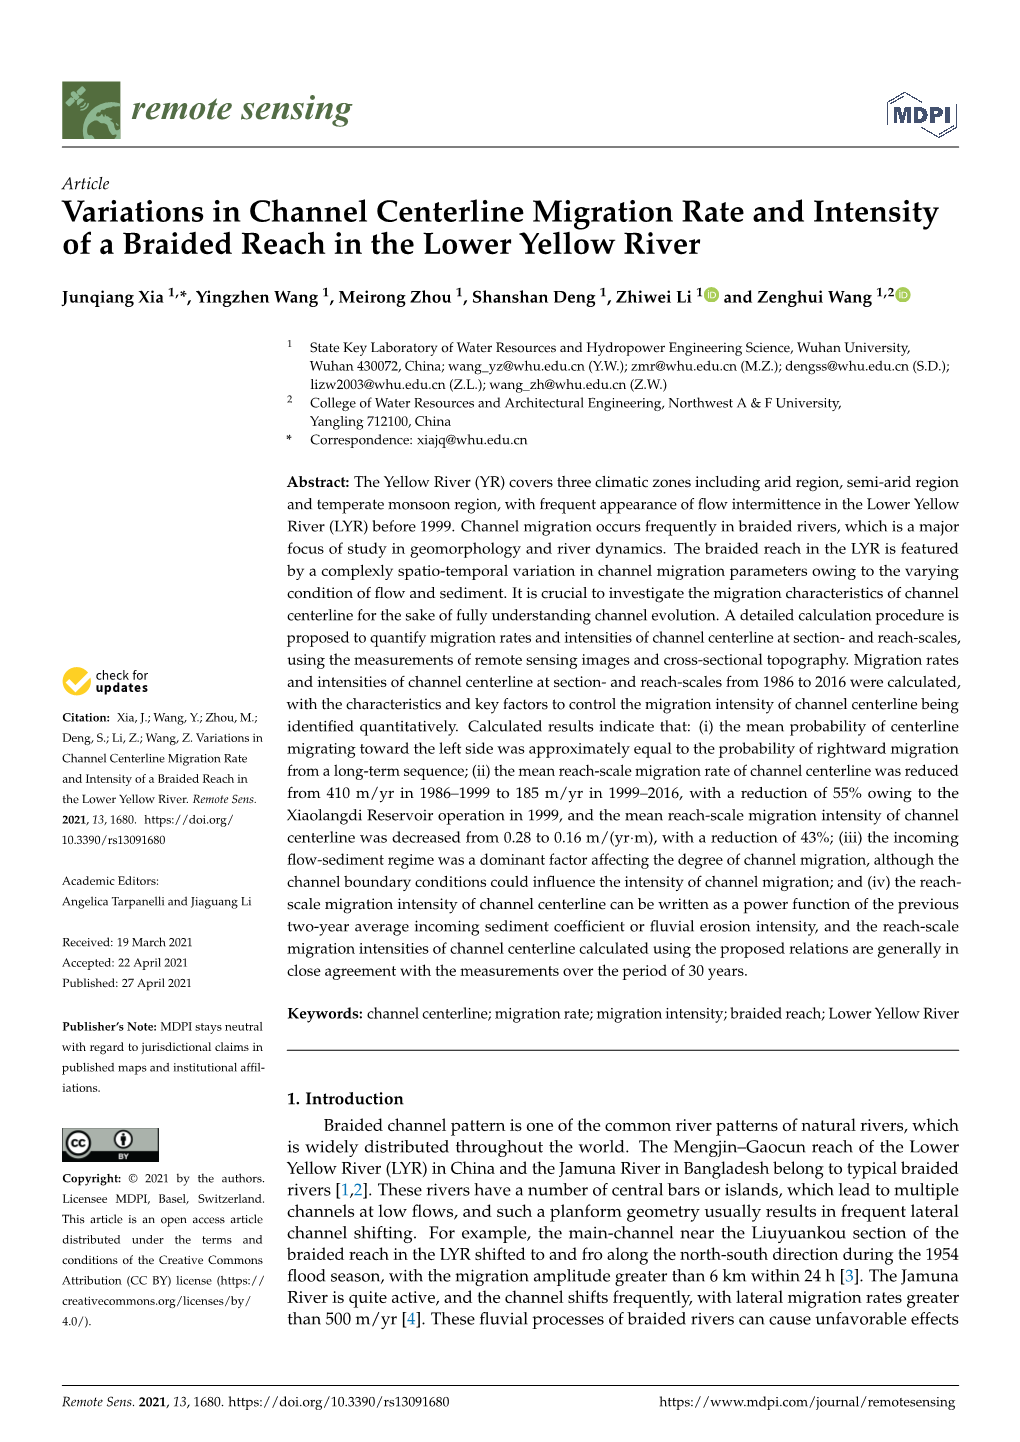 Variations in Channel Centerline Migration Rate and Intensity of a Braided Reach in the Lower Yellow River